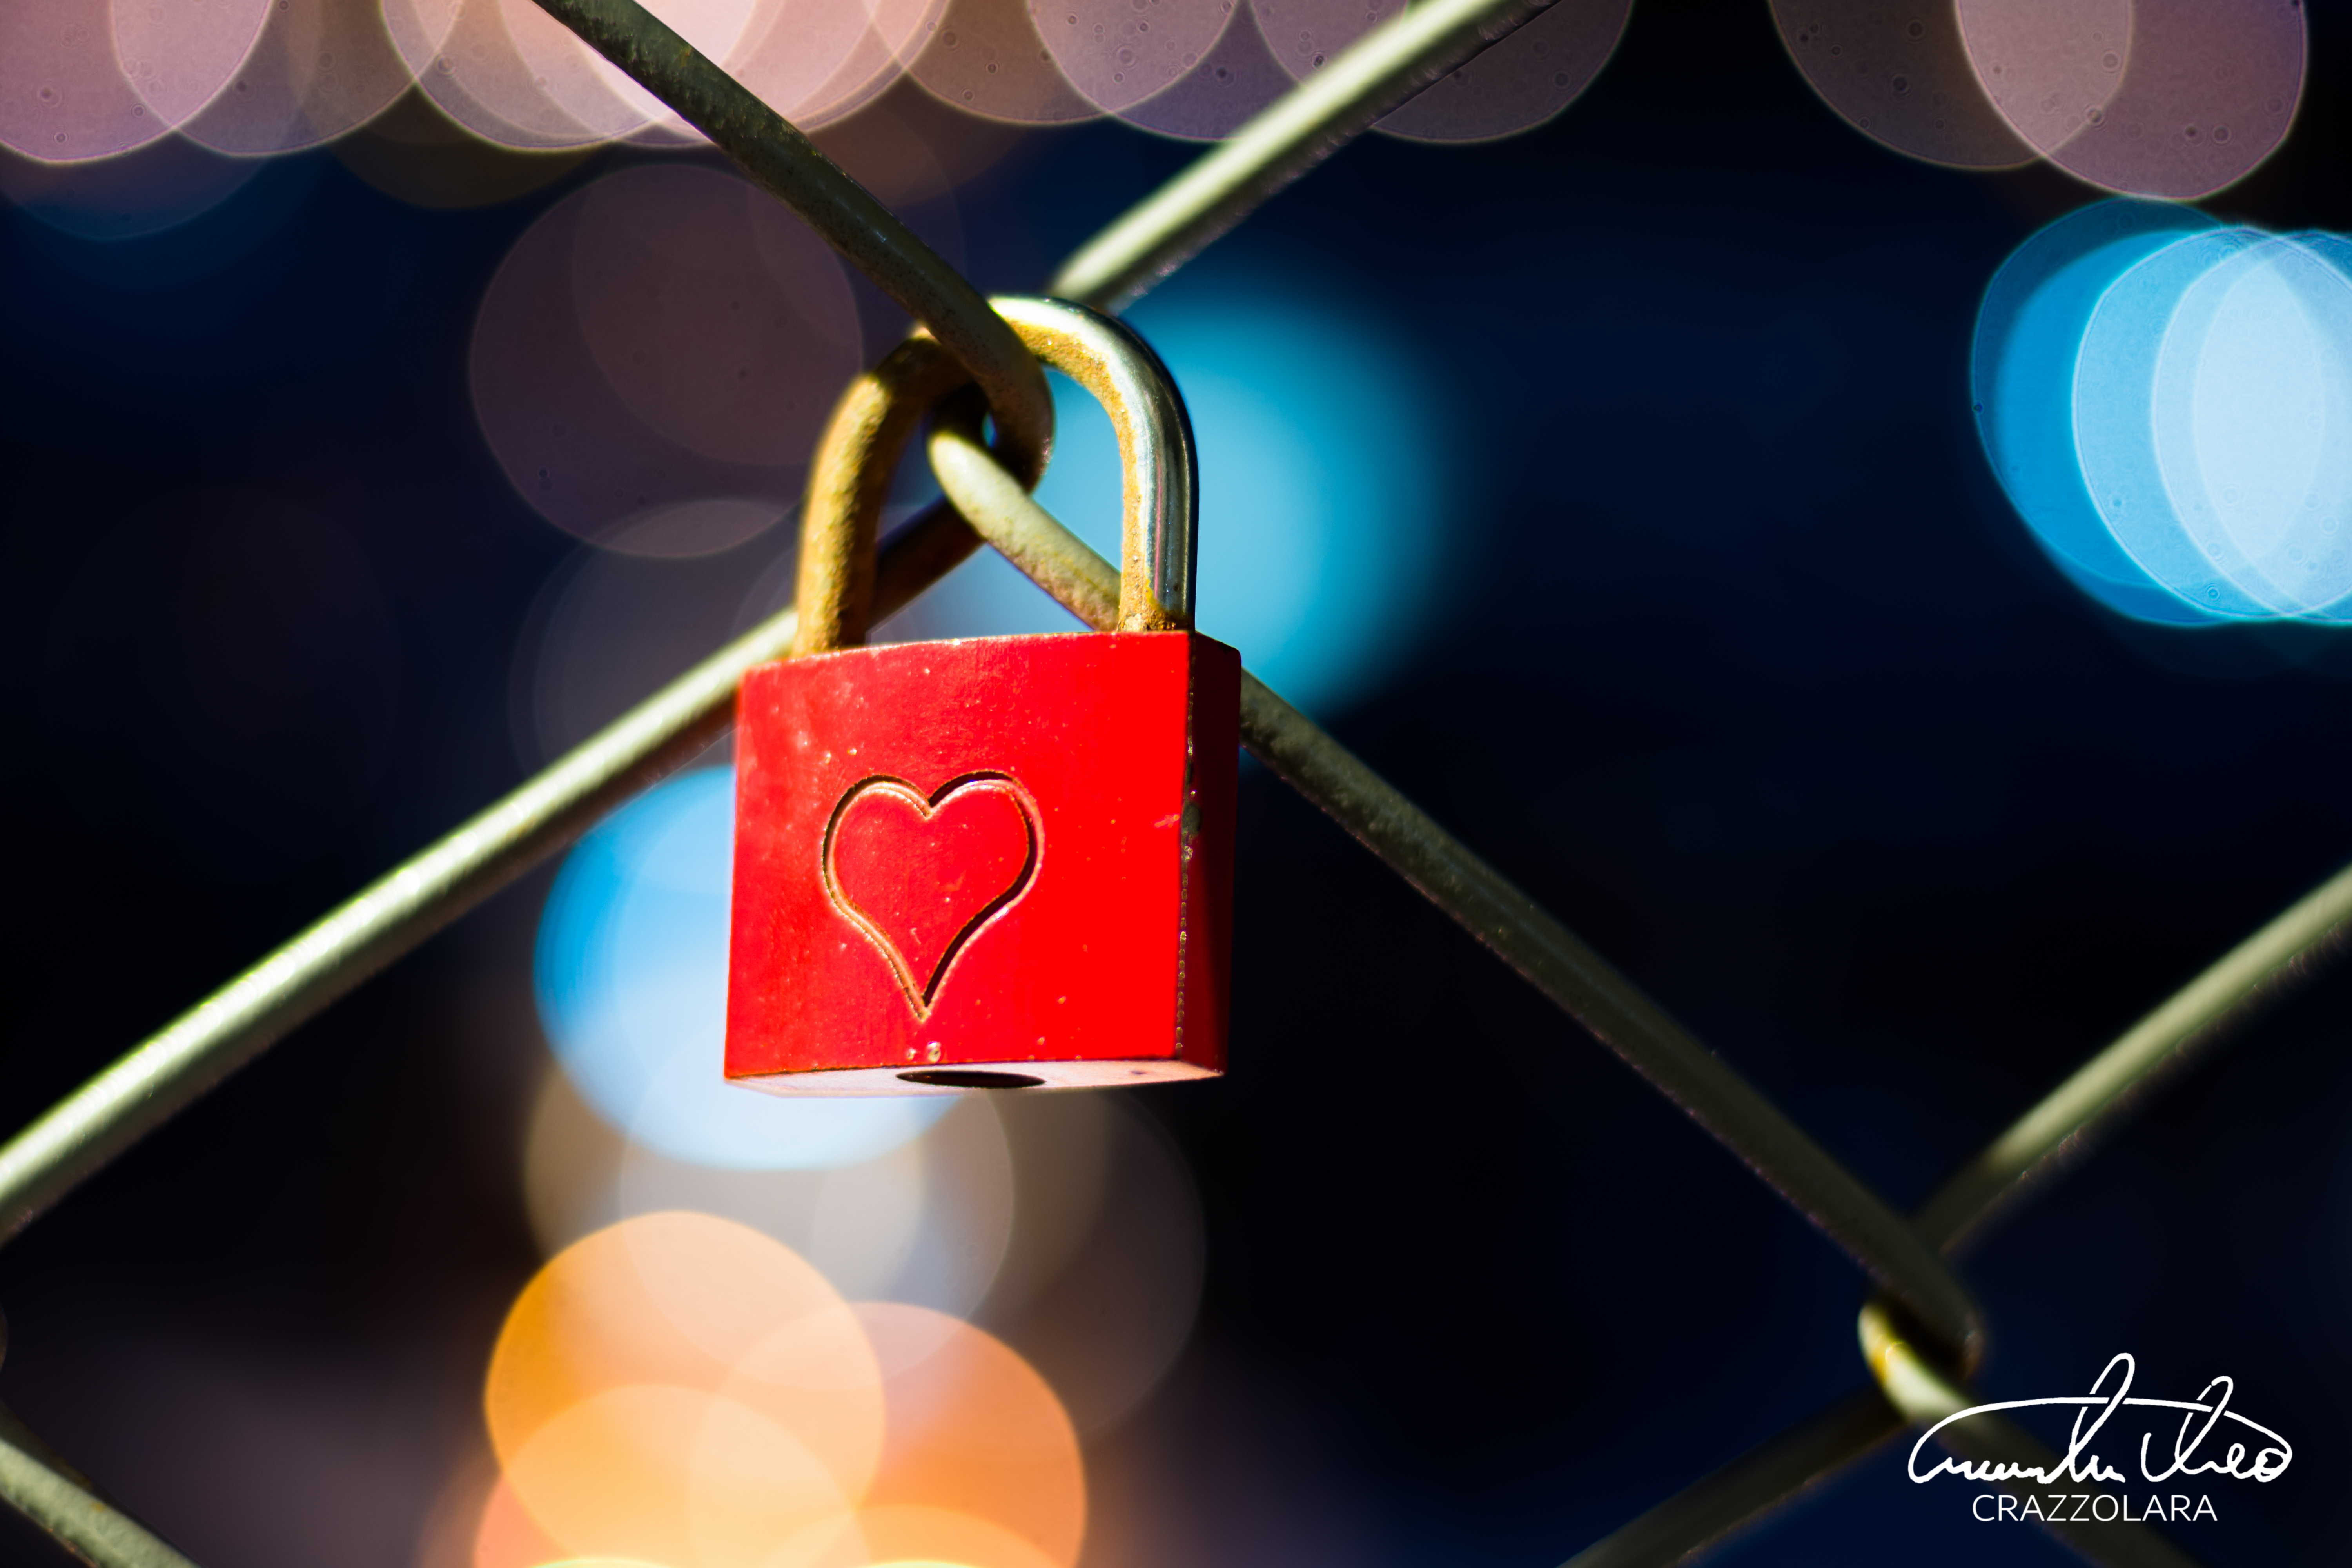 Mobile wallpaper: Lock, Heart, Love, 61069 download the picture for free.